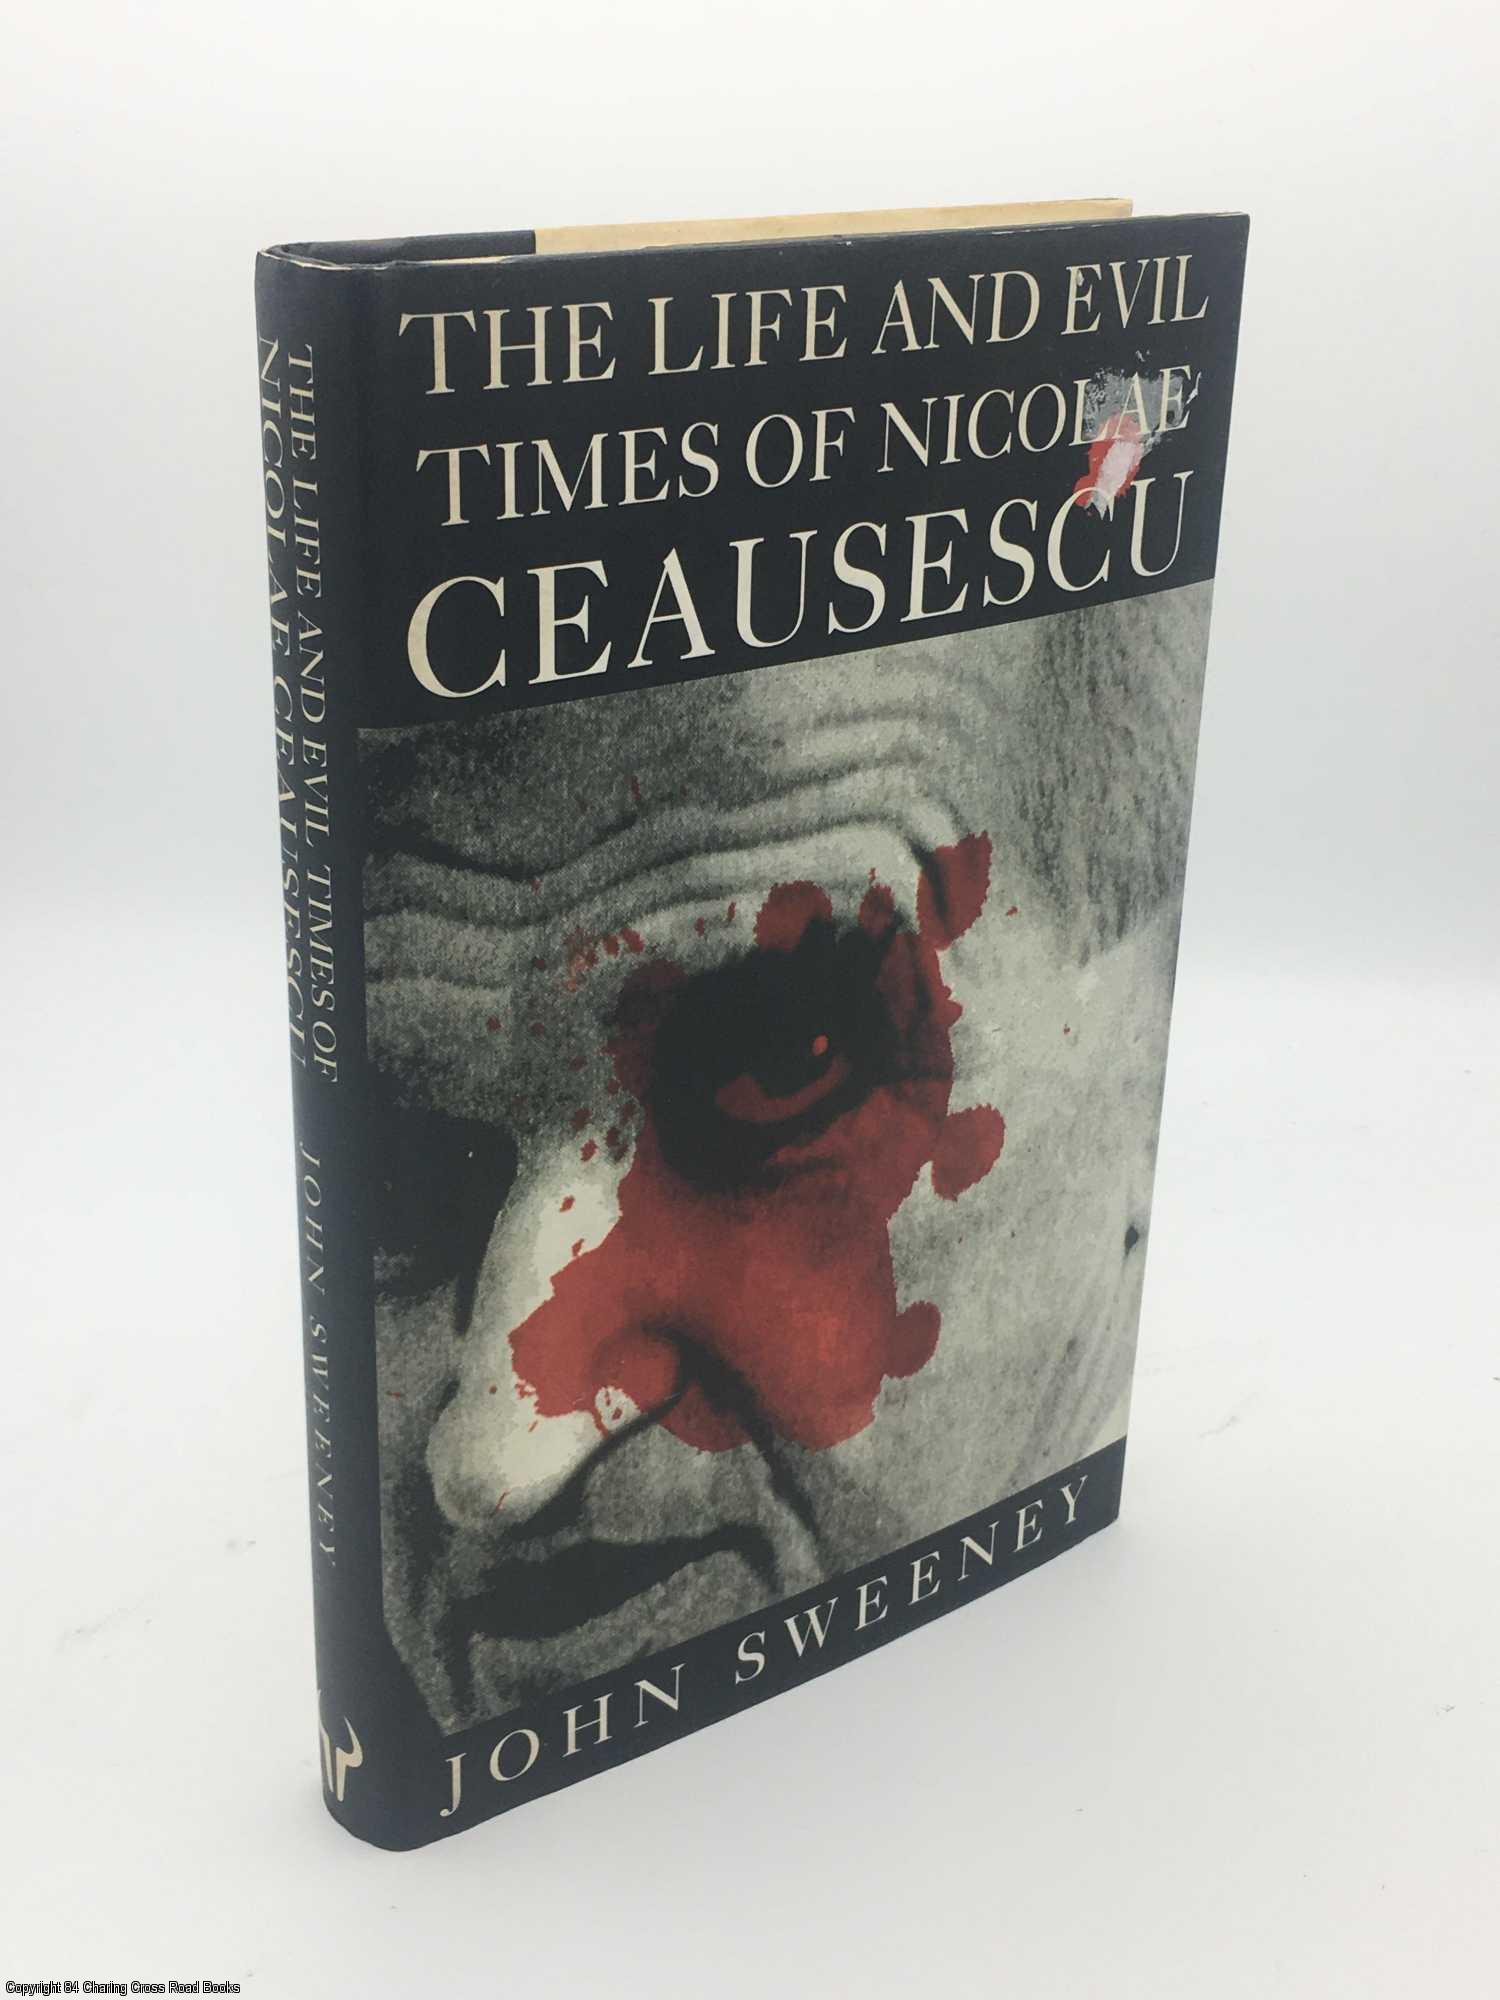 The Life and Evil Times of Nicolae Ceausescu - Sweeney, John